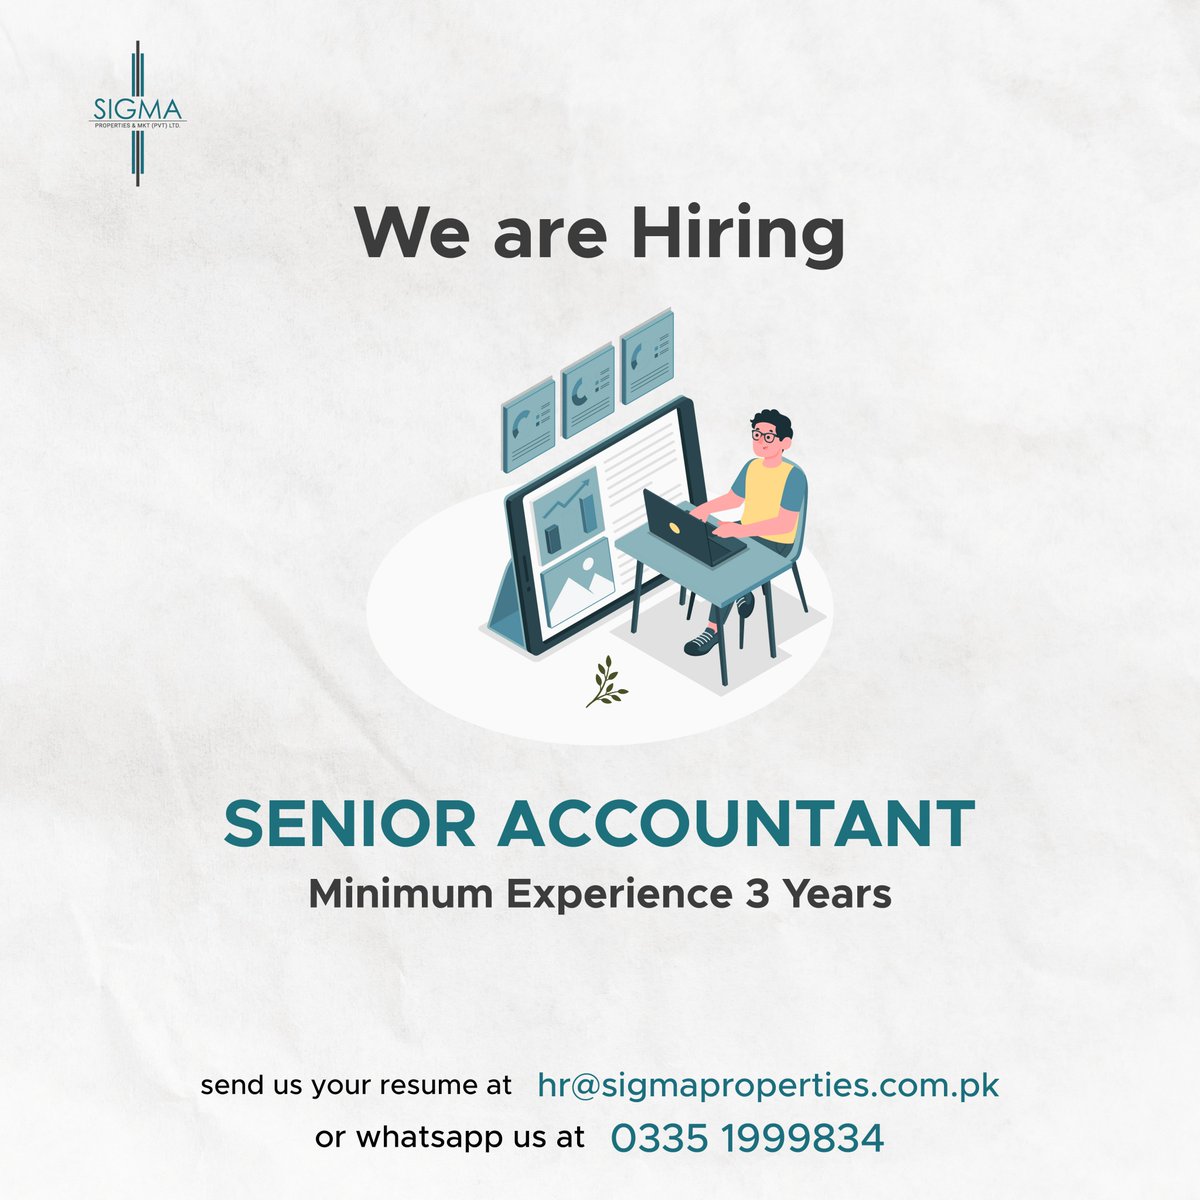 We are Hiring Senior Accountant
Job vacancy: 1
Qualification: Minimum Graduation BS Accounting, M.Com, BBA, MBA in Finance, CA, ACCA
Experience: Minimum 3 Years #frontdeskofficer #receptionist #SeniorAccountant #Accountant